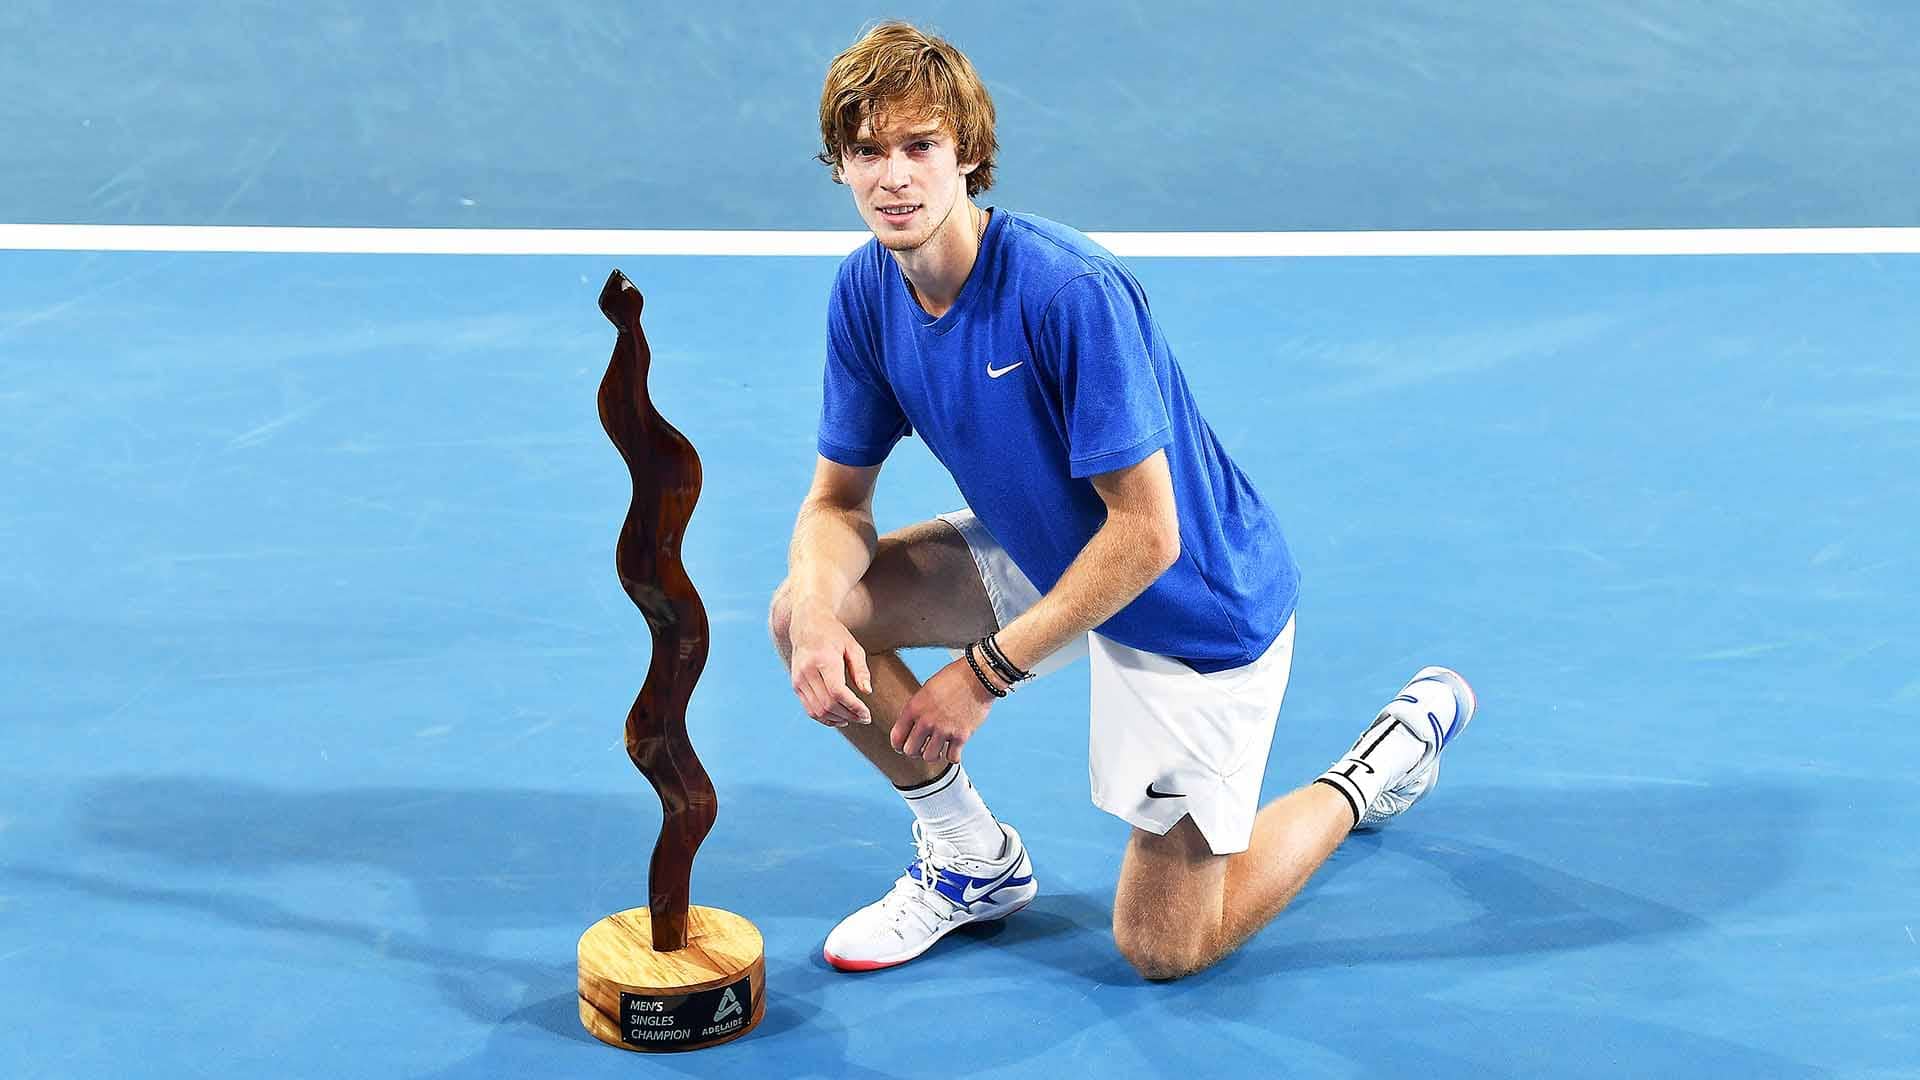 Andrey Rublev owns an 8-0 record this season.